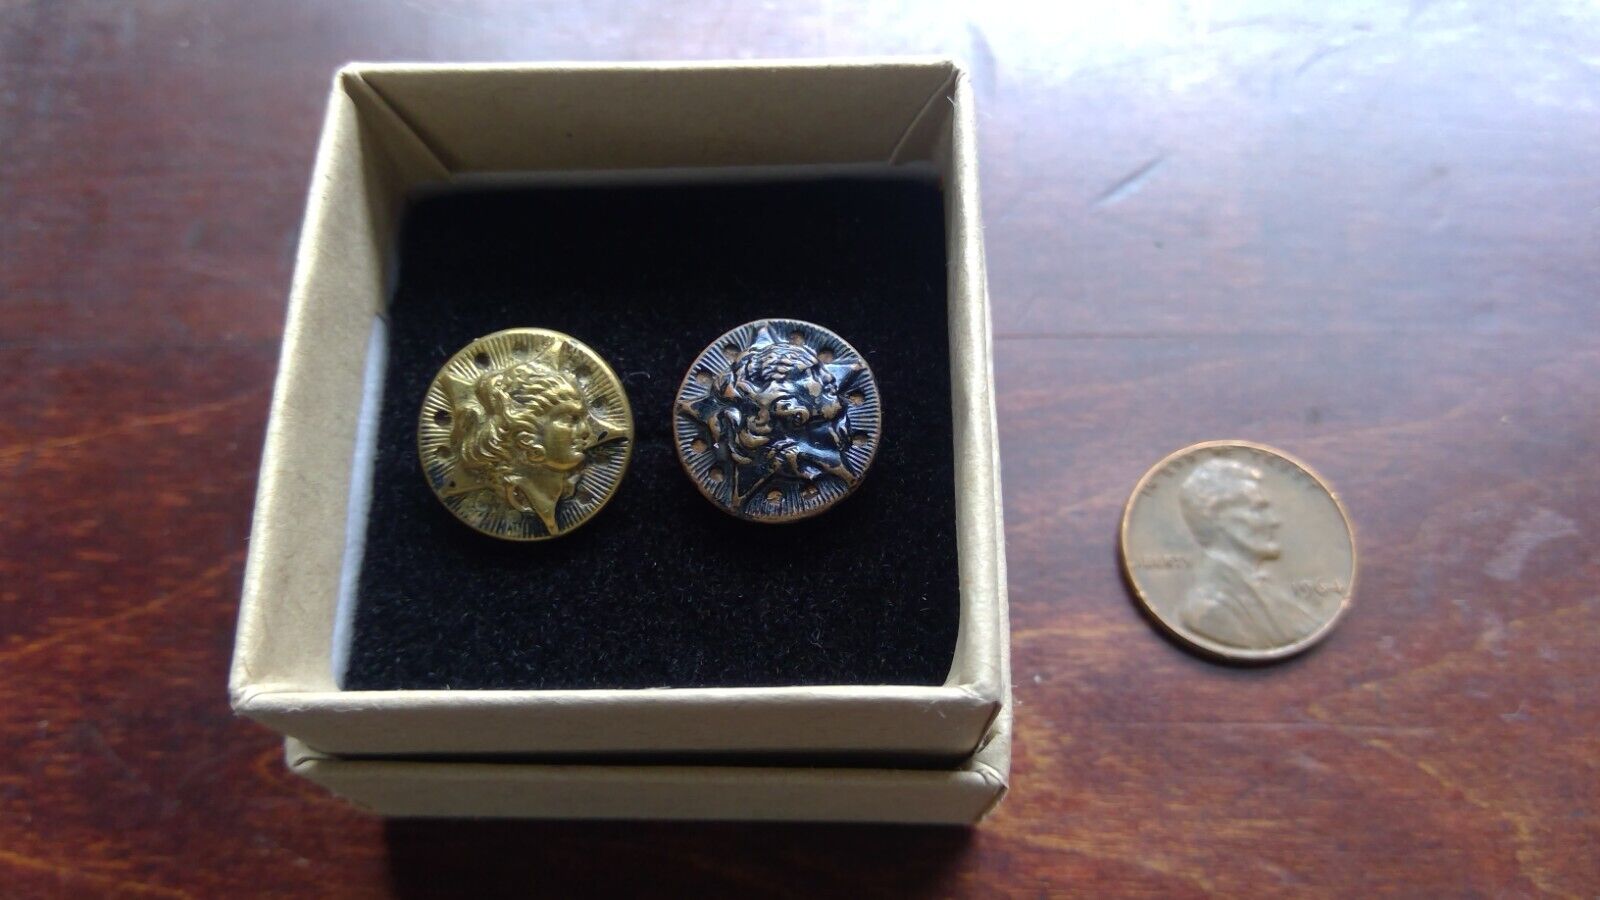 Astrea Antique Metal Brass Victorian Picture Buttons 15mm Lot of 2, 9/16th Inch Без бренда - фотография #4